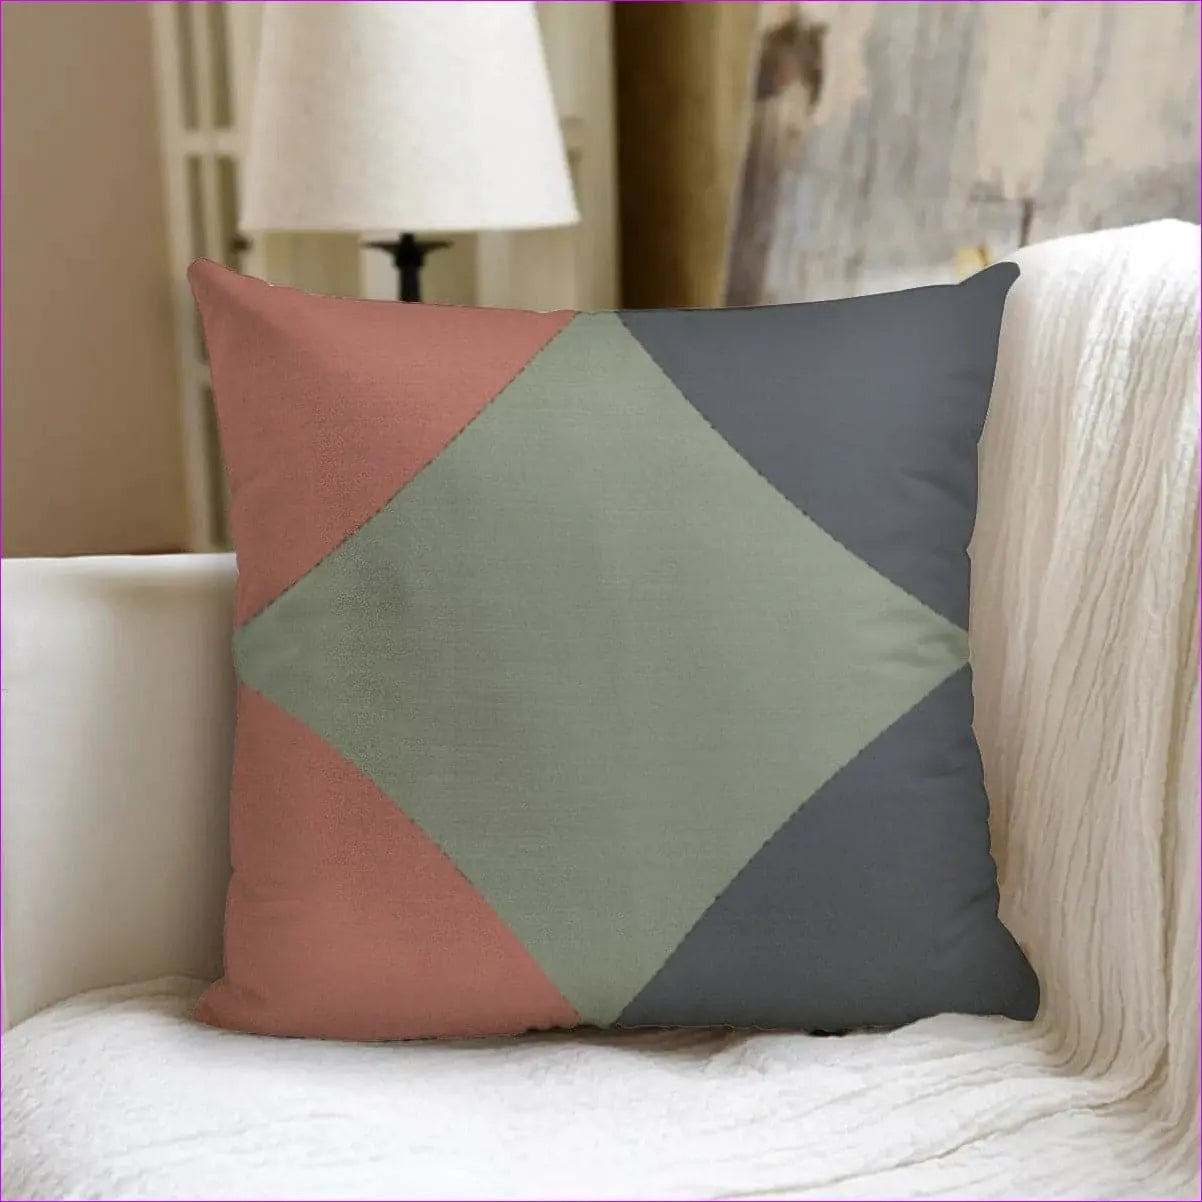 M multi-colored Eclectic 3 Double Sided Couch Pillow with Pillow Inserts - couch pillow at TFC&H Co.